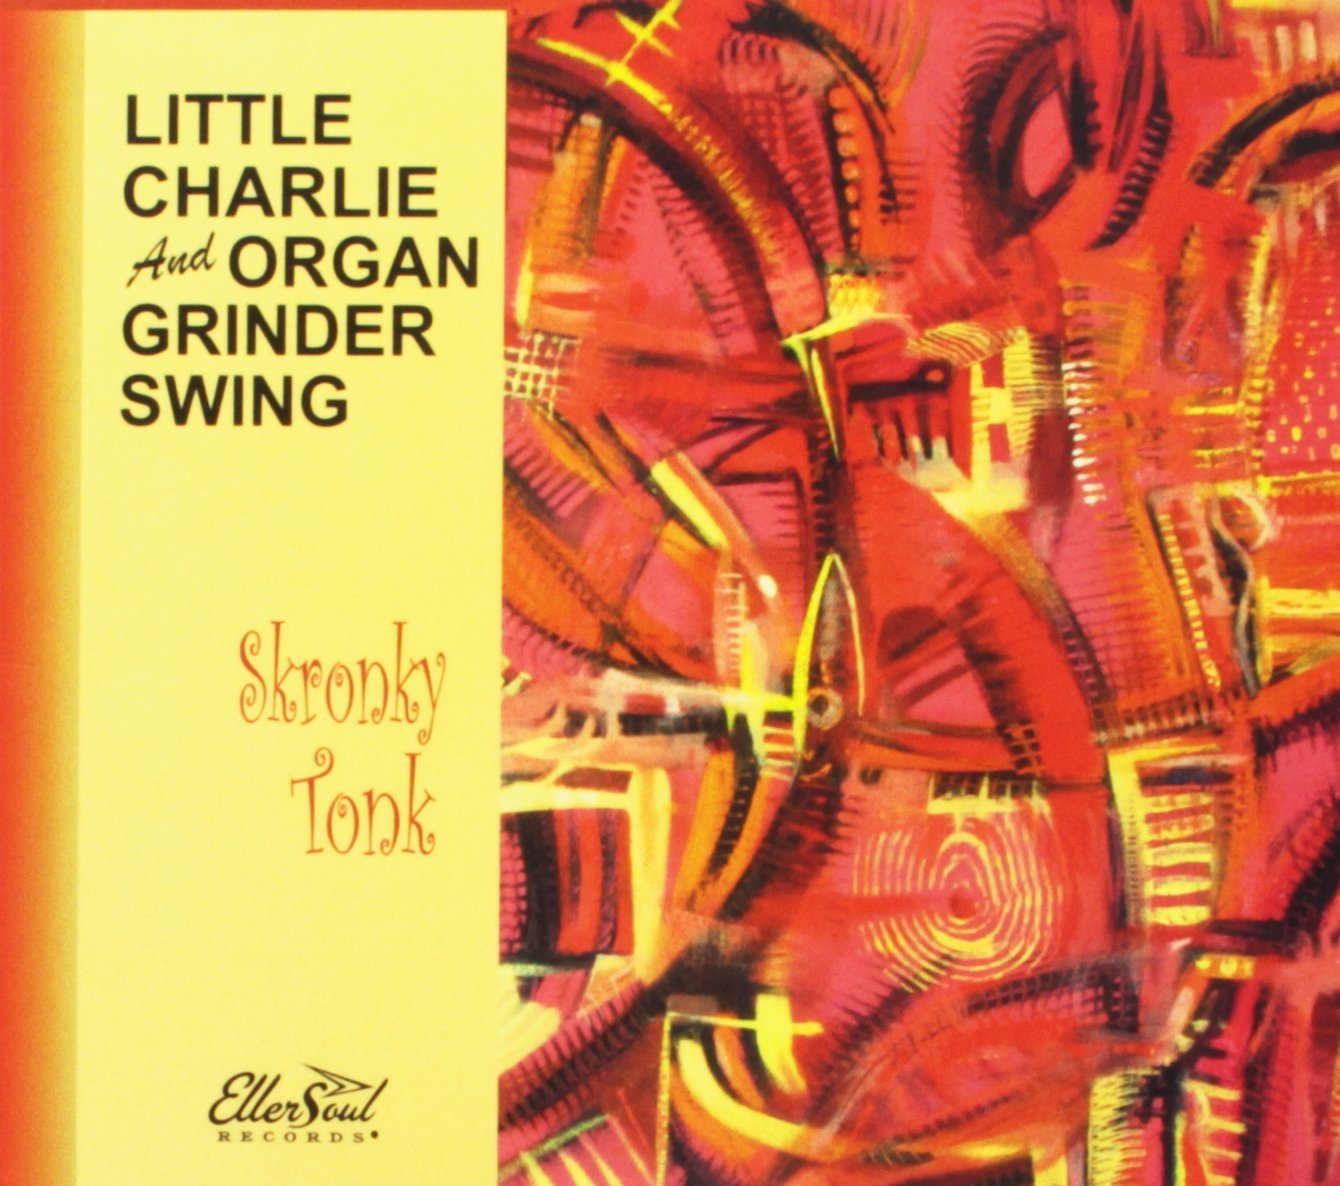 LITTLE CHARLIE AND ORGAN GRINDER SWING - Skronky Tonk cover 